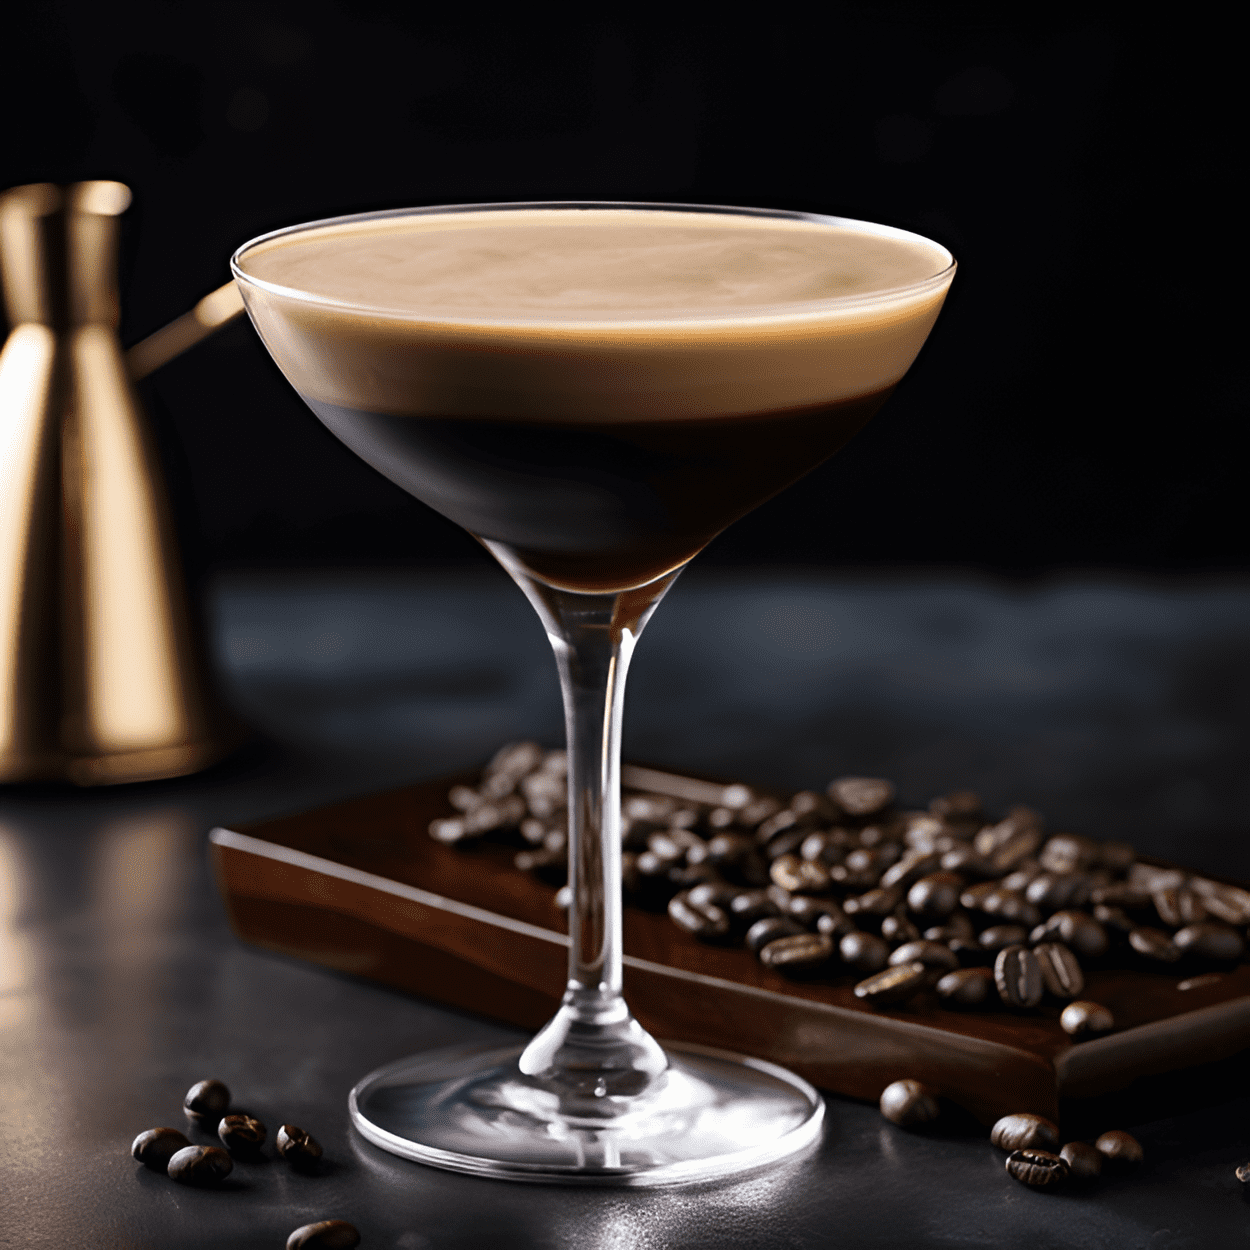 Espresso Martini Cocktail Recipe - The Espresso Martini is a rich, velvety, and slightly sweet cocktail with a strong coffee flavor and a hint of bitterness. It has a creamy texture and a frothy top, making it a luxurious and indulgent drink.